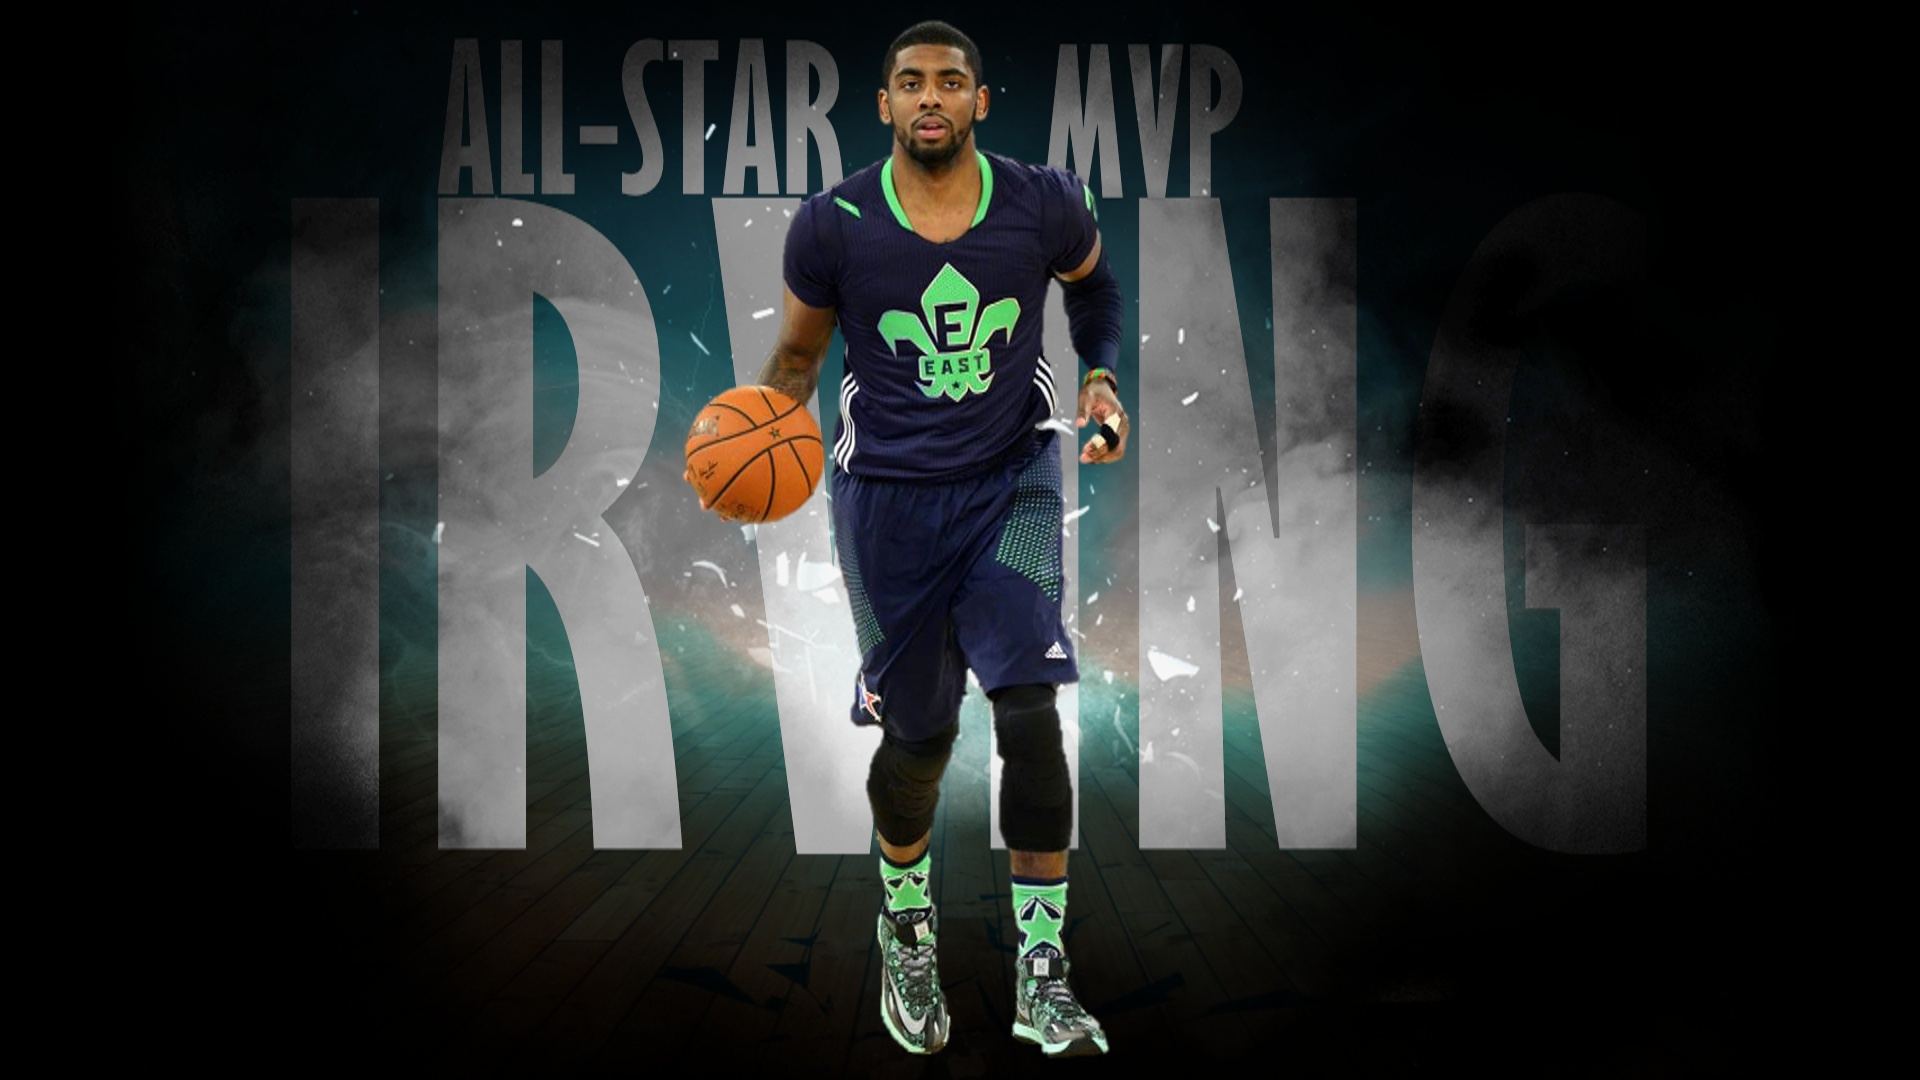 Kyrie Irving Wallpapers 81 pictures